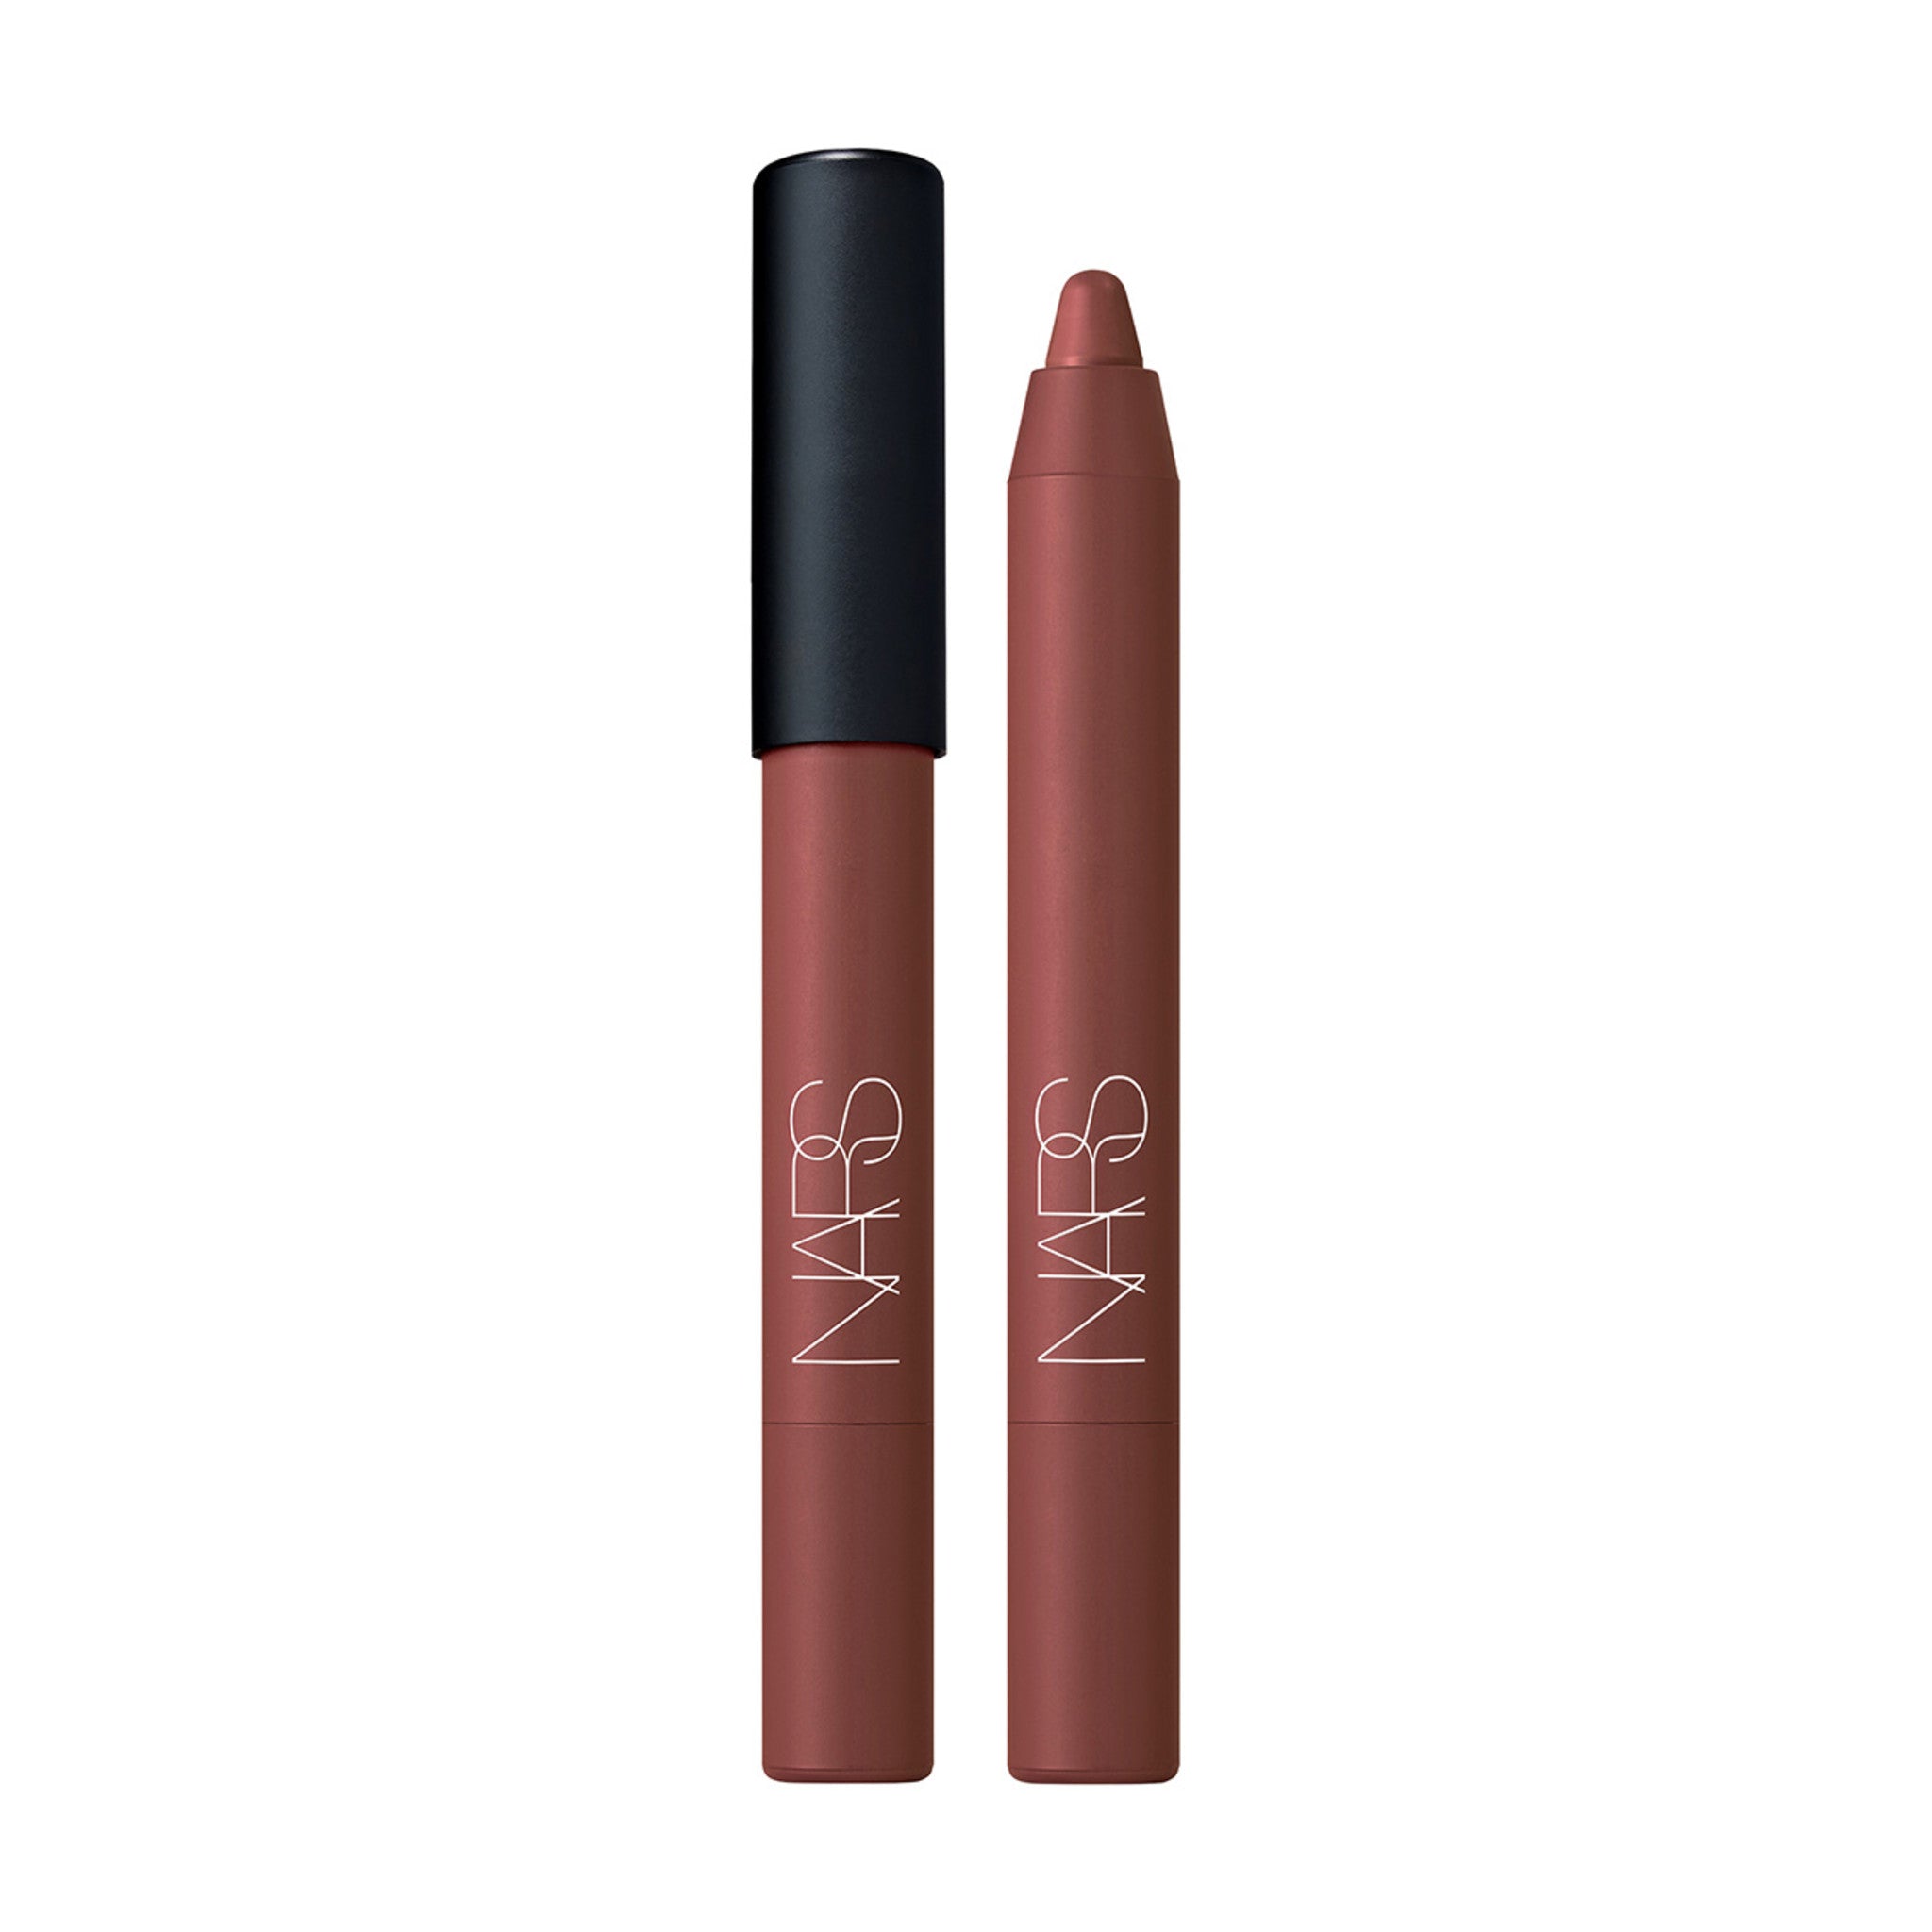 Nars Powermatte High-Intensity Long-Lasting Lip Pencil Color/Shade variant: Bohemian Rhapsody main image. This product is in the color brown